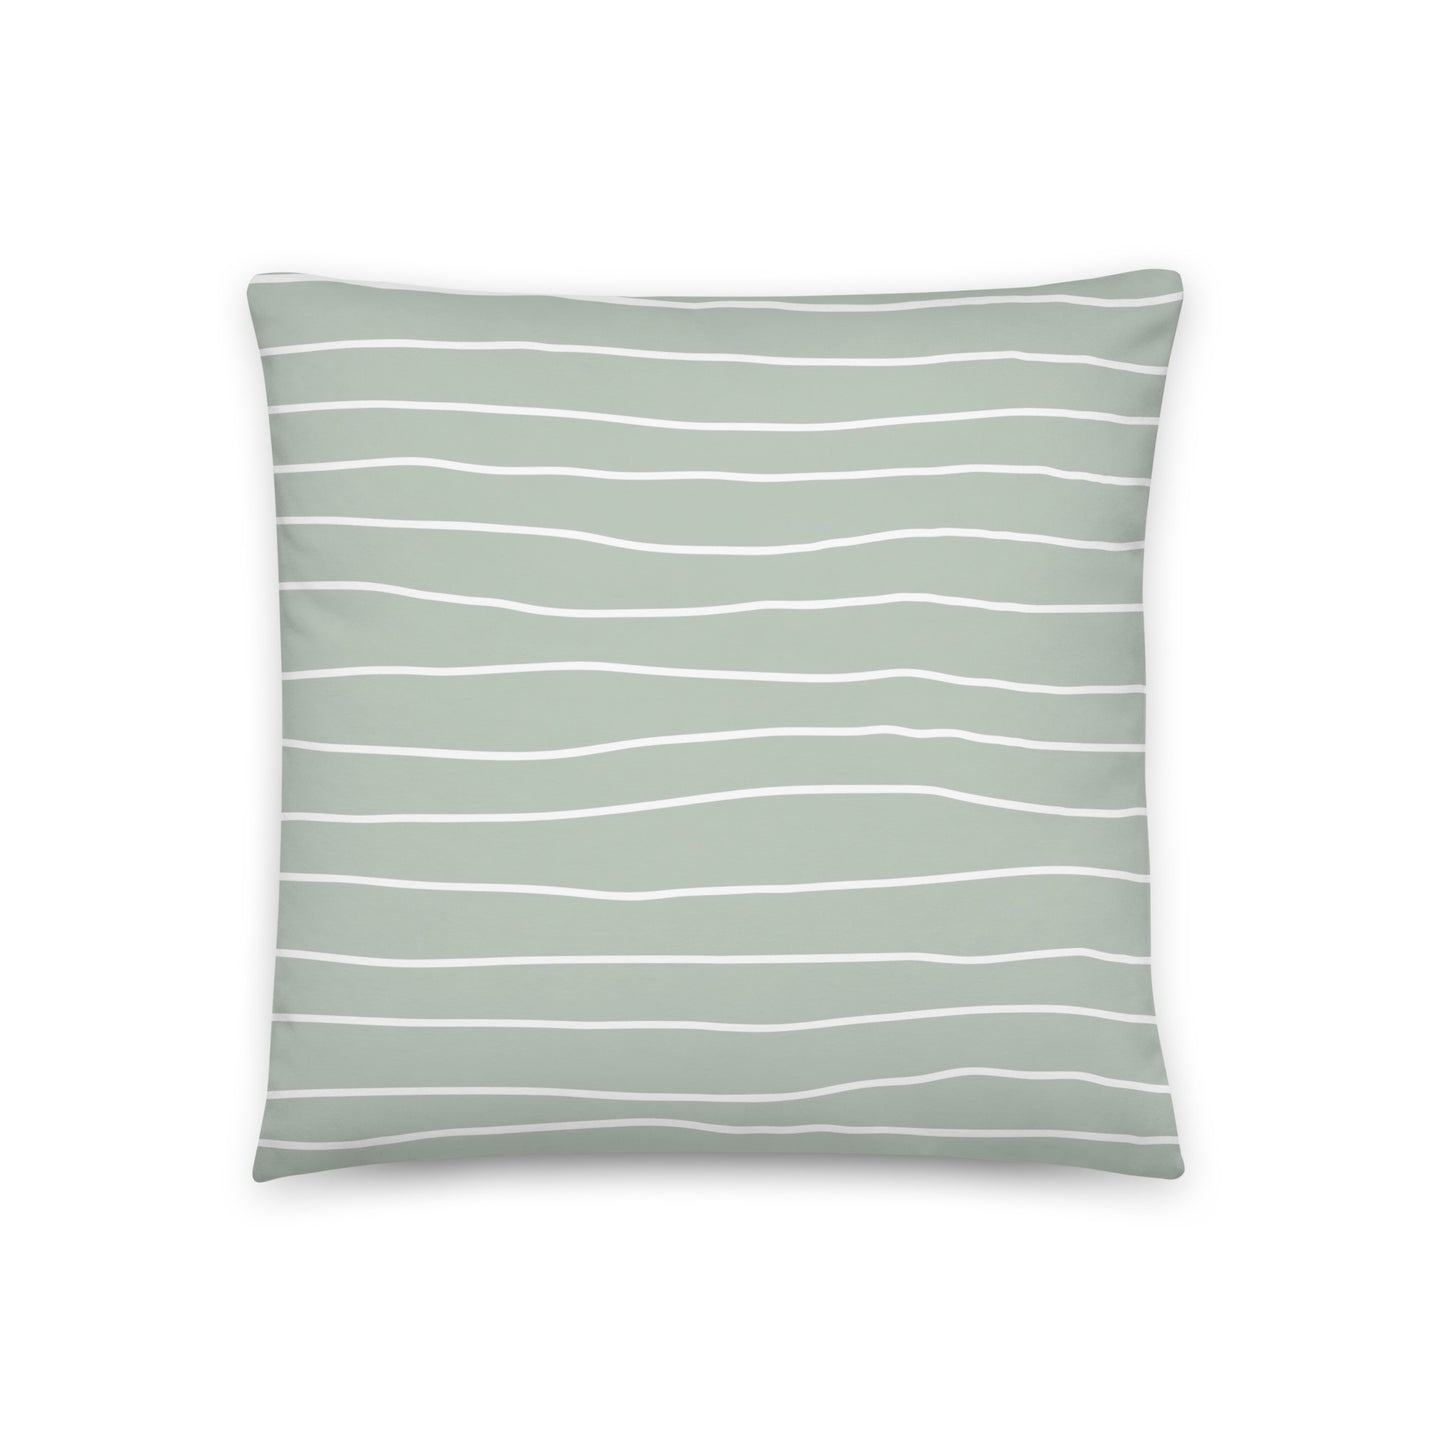 Hand Drawn Lines - Sustainably Made Pillows